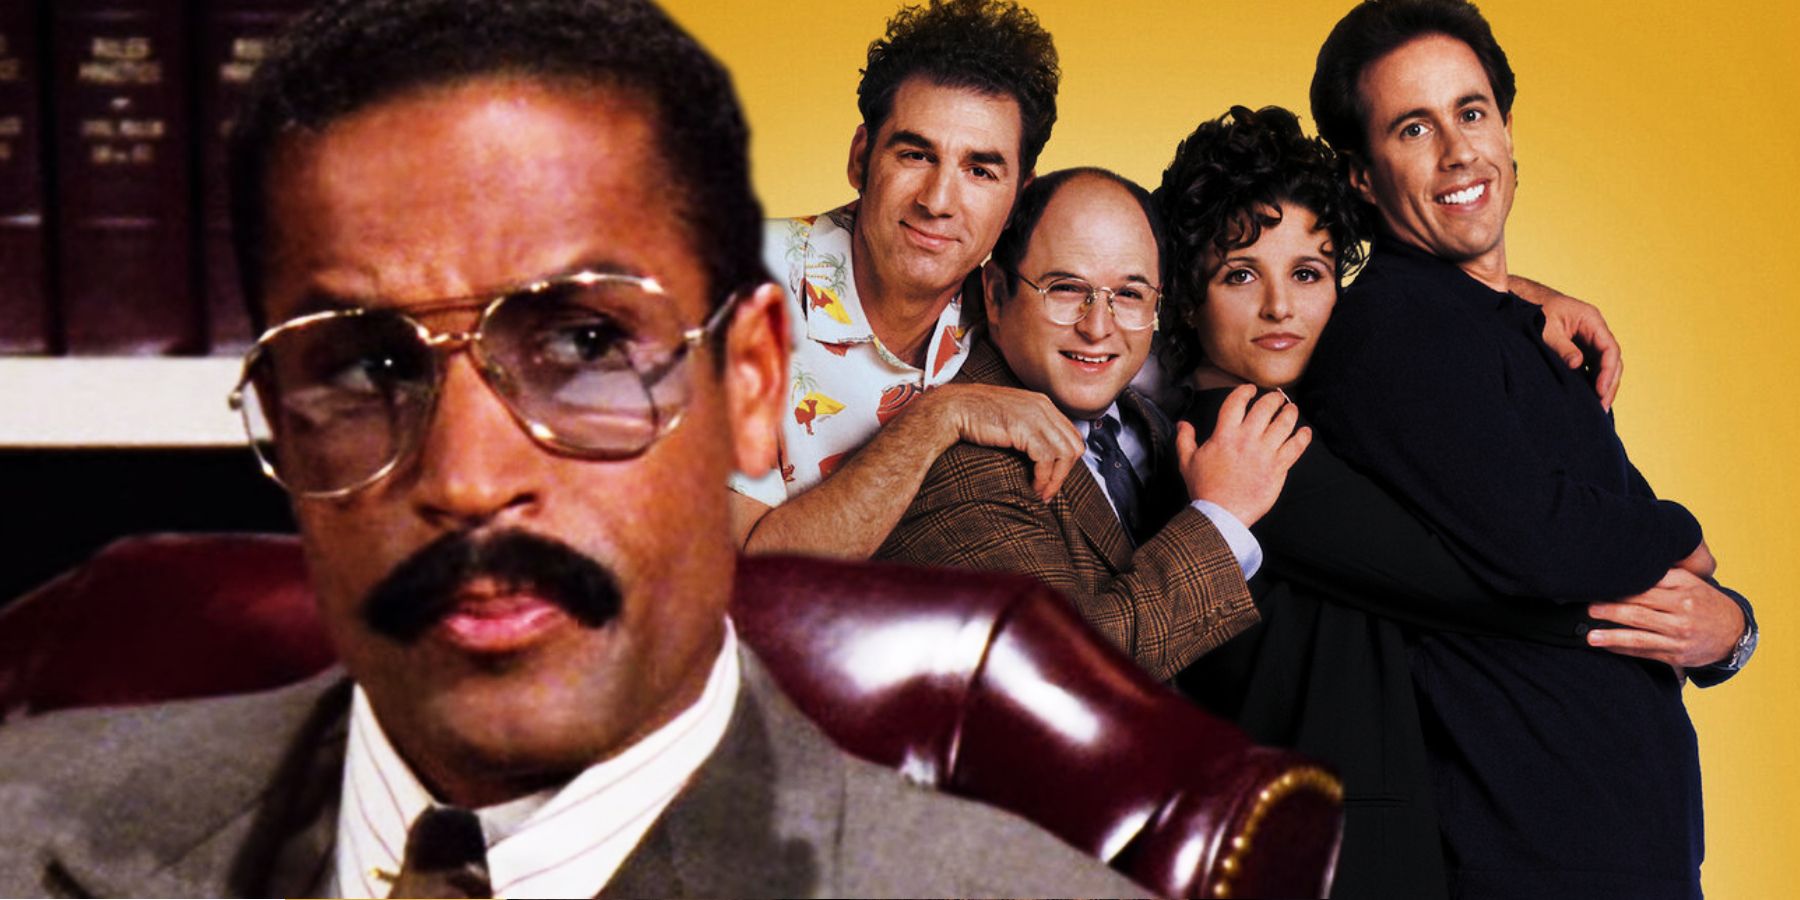 Phil Morris as Jackie Chiles and the cast of Seinfeld